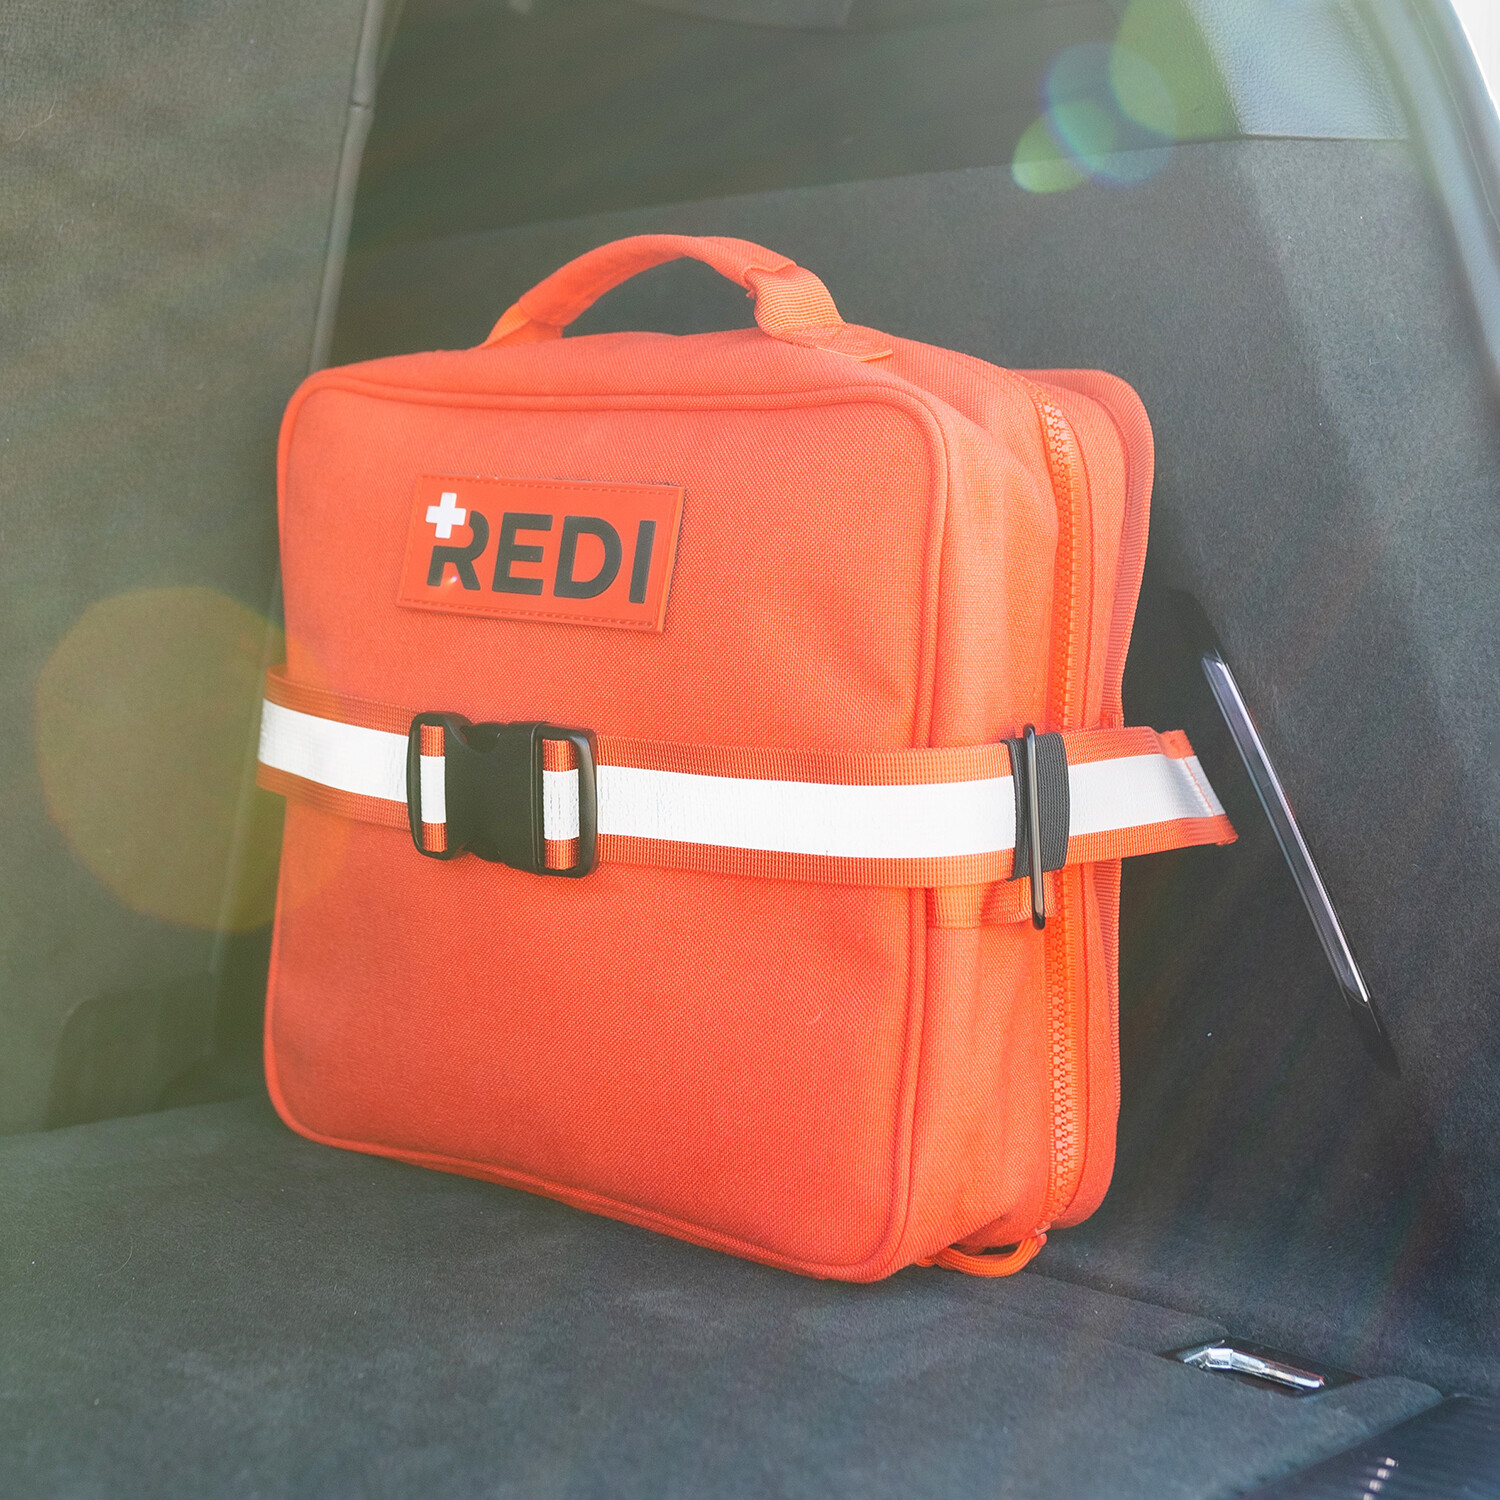 Roadie First Aid Kit For Your Vehicle Redi Roadie First Aid Kit